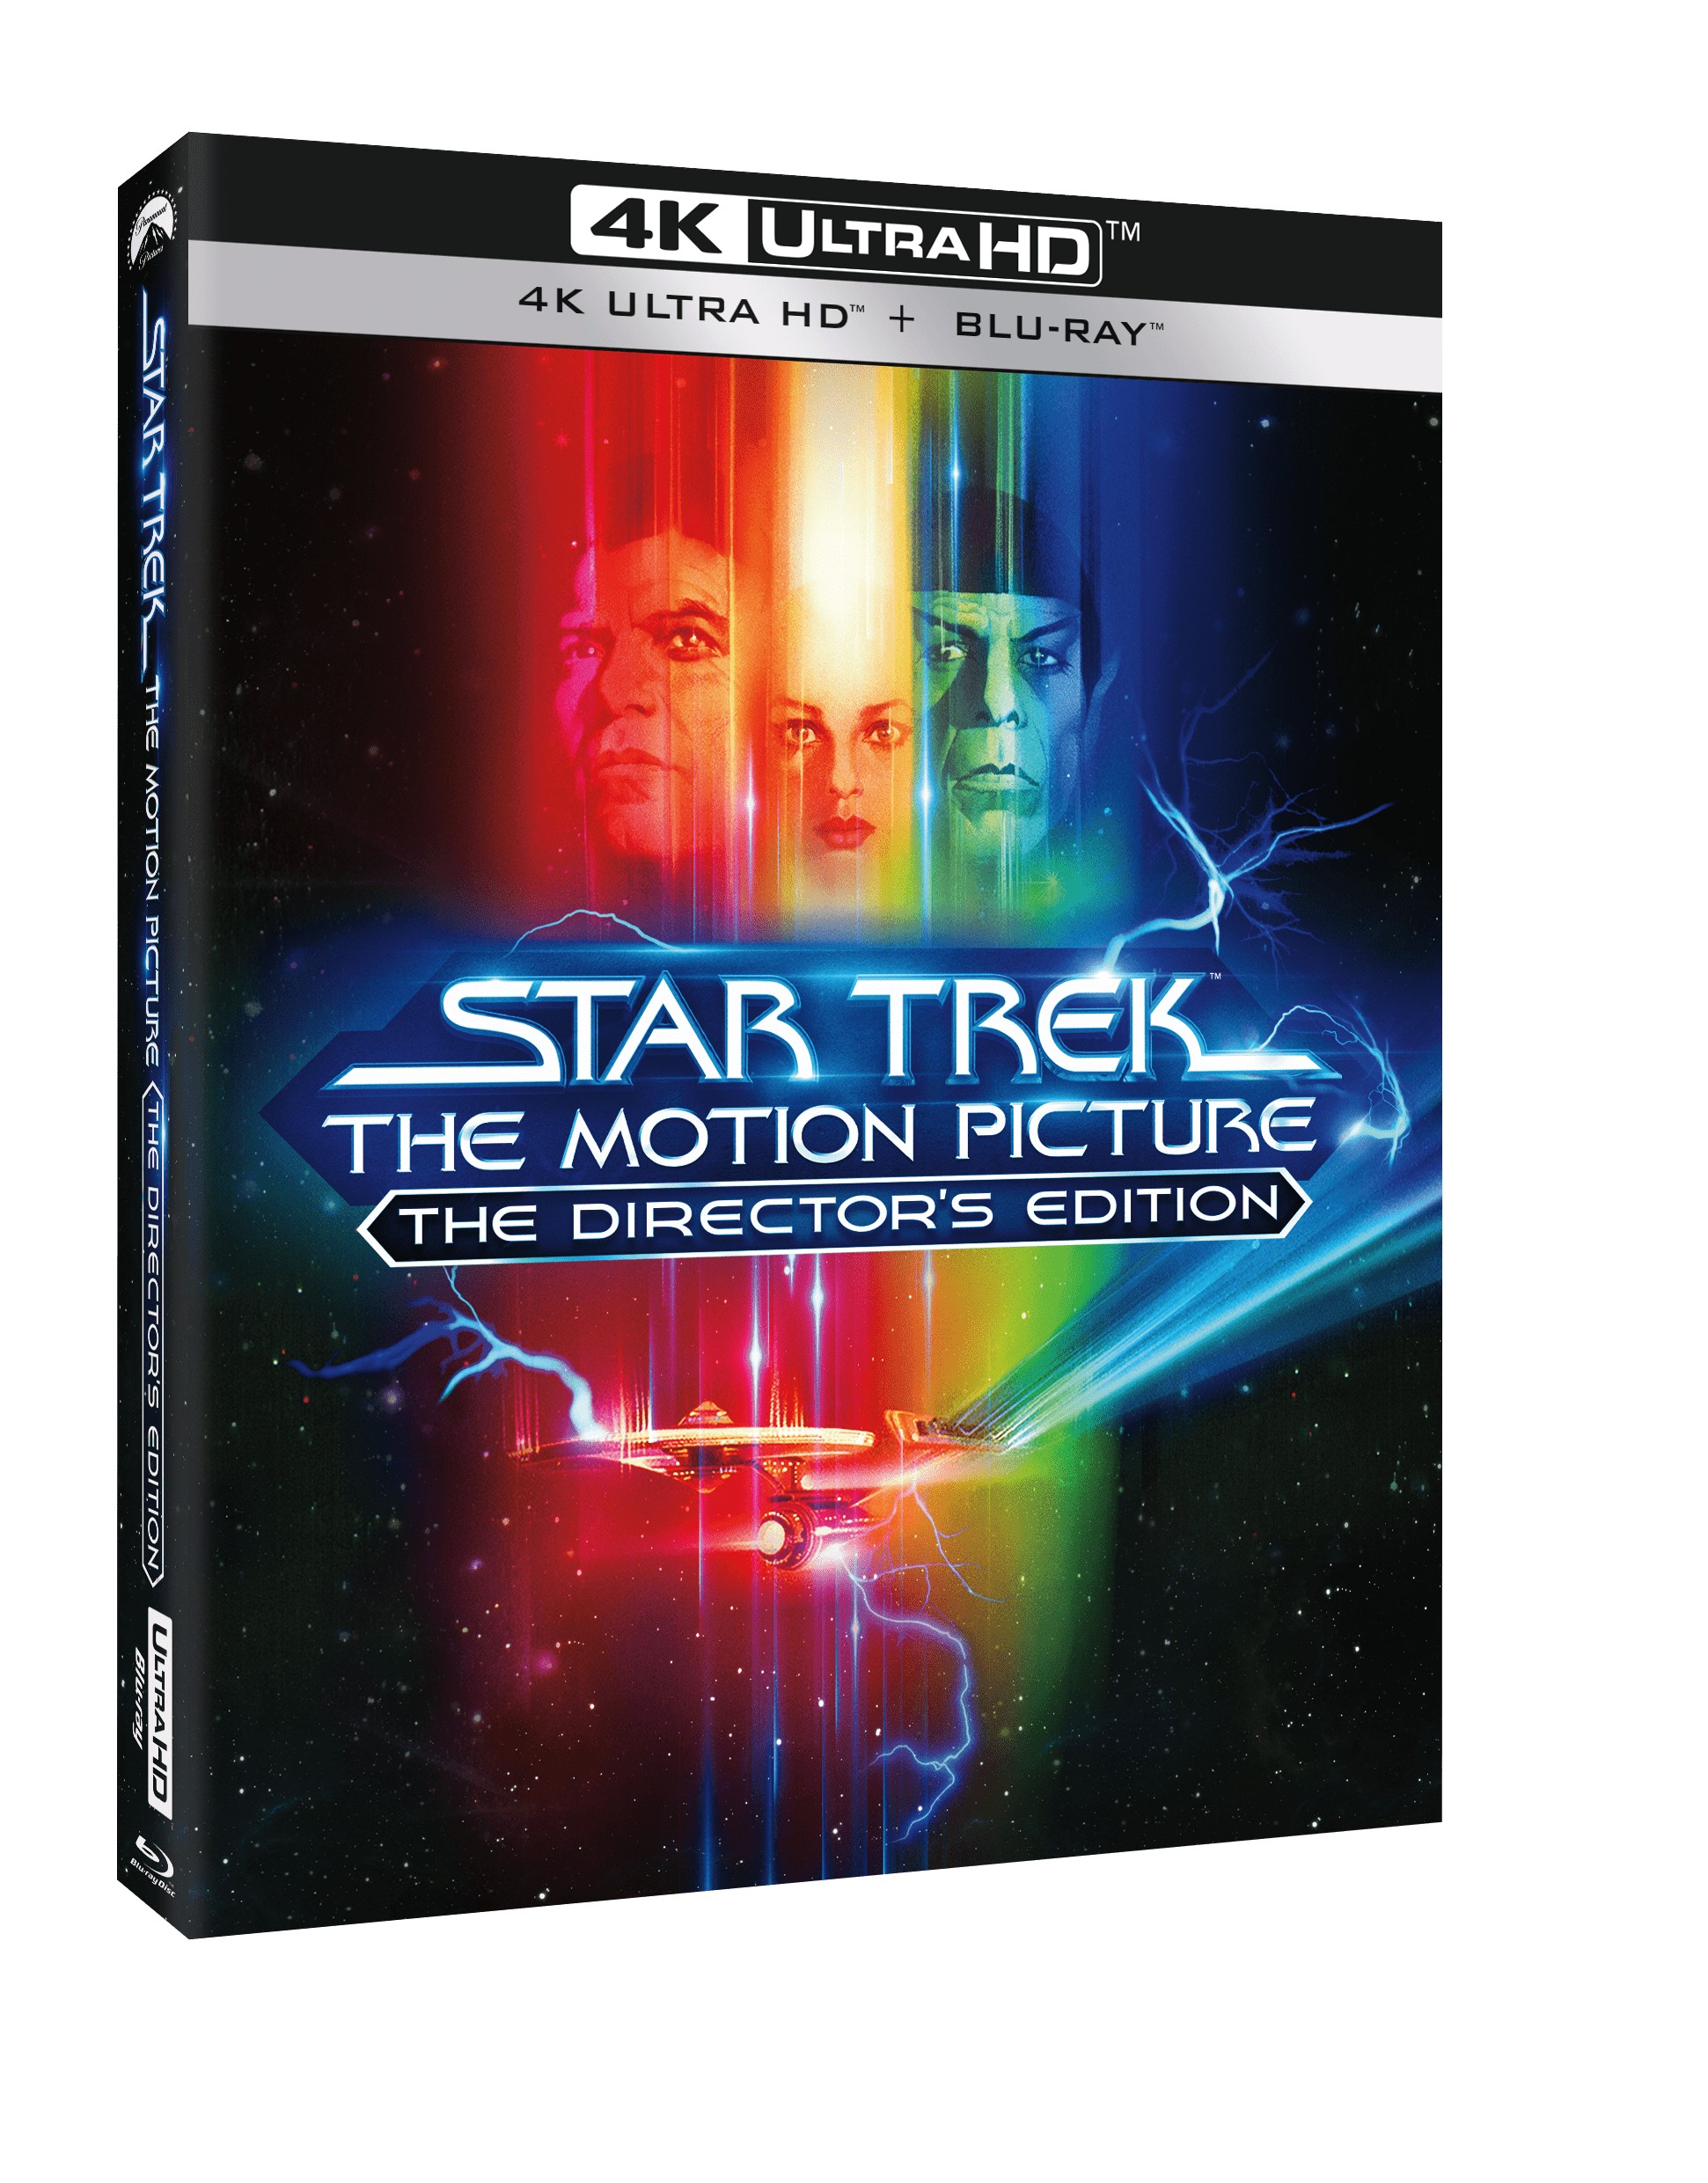 CONFIDENTIEL - STAR TREK : THE MOTION PICTURE - THE DIRECTOR'S EDITION - COMBO 2 UHD 4K + 1 BD